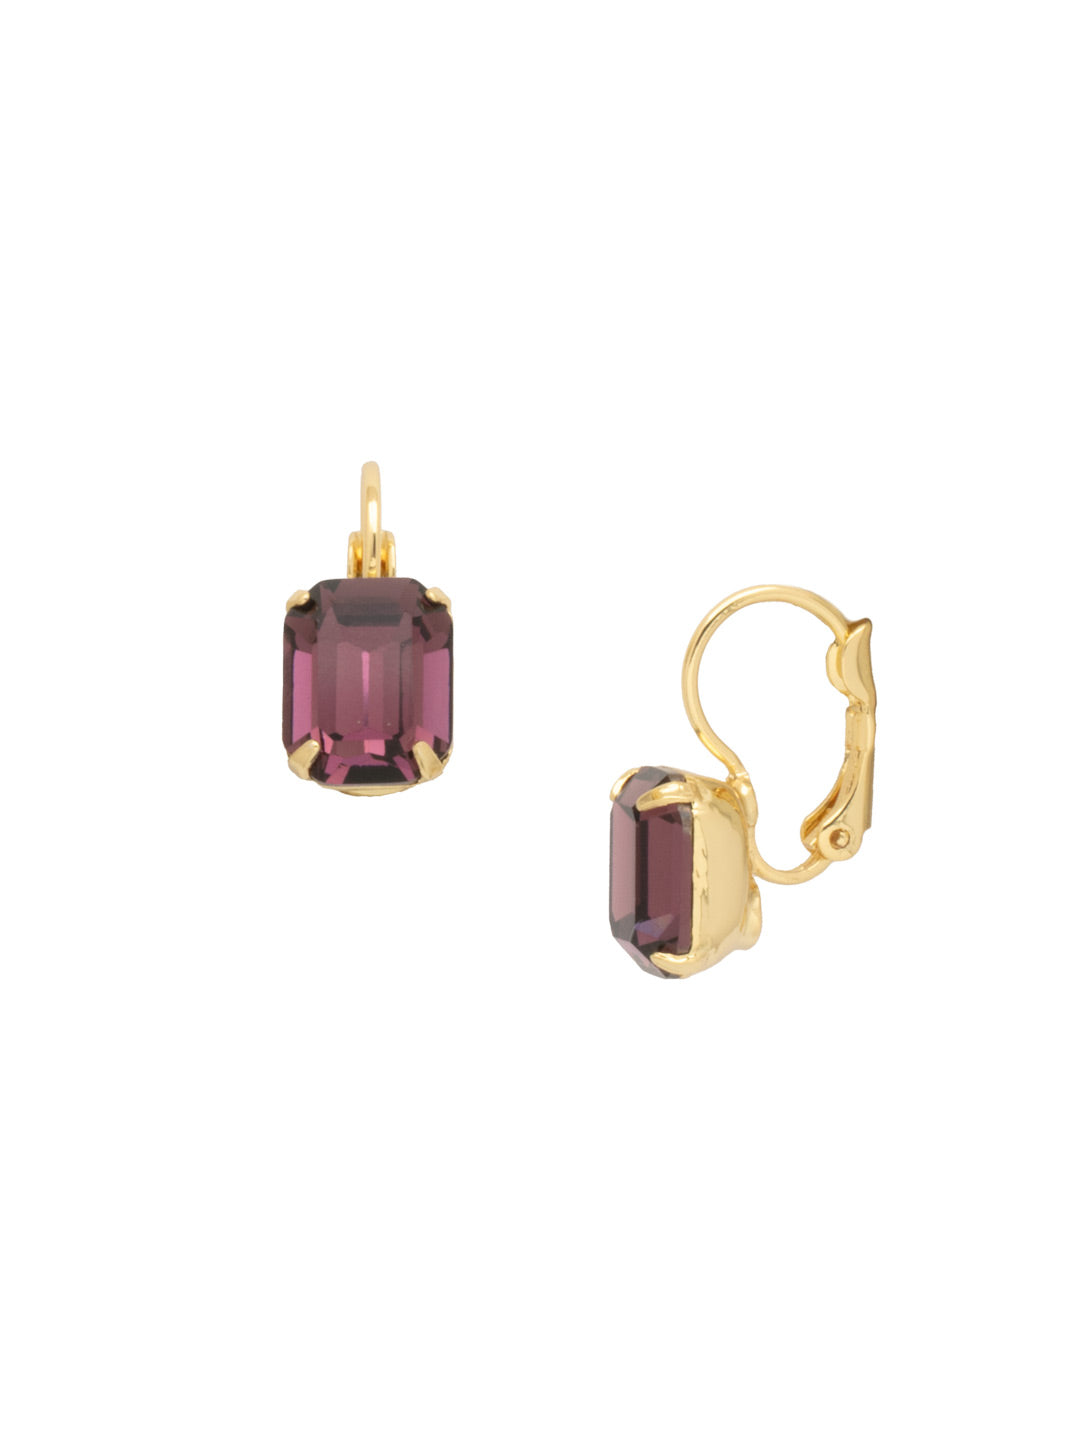 Octavia Dangle Earrings - EFK6BGMRL - <p>The Octavia Dangle Earrings feature a small emerald cut crystal dangling from a lever-back French wire. From Sorrelli's Merlot collection in our Bright Gold-tone finish.</p>